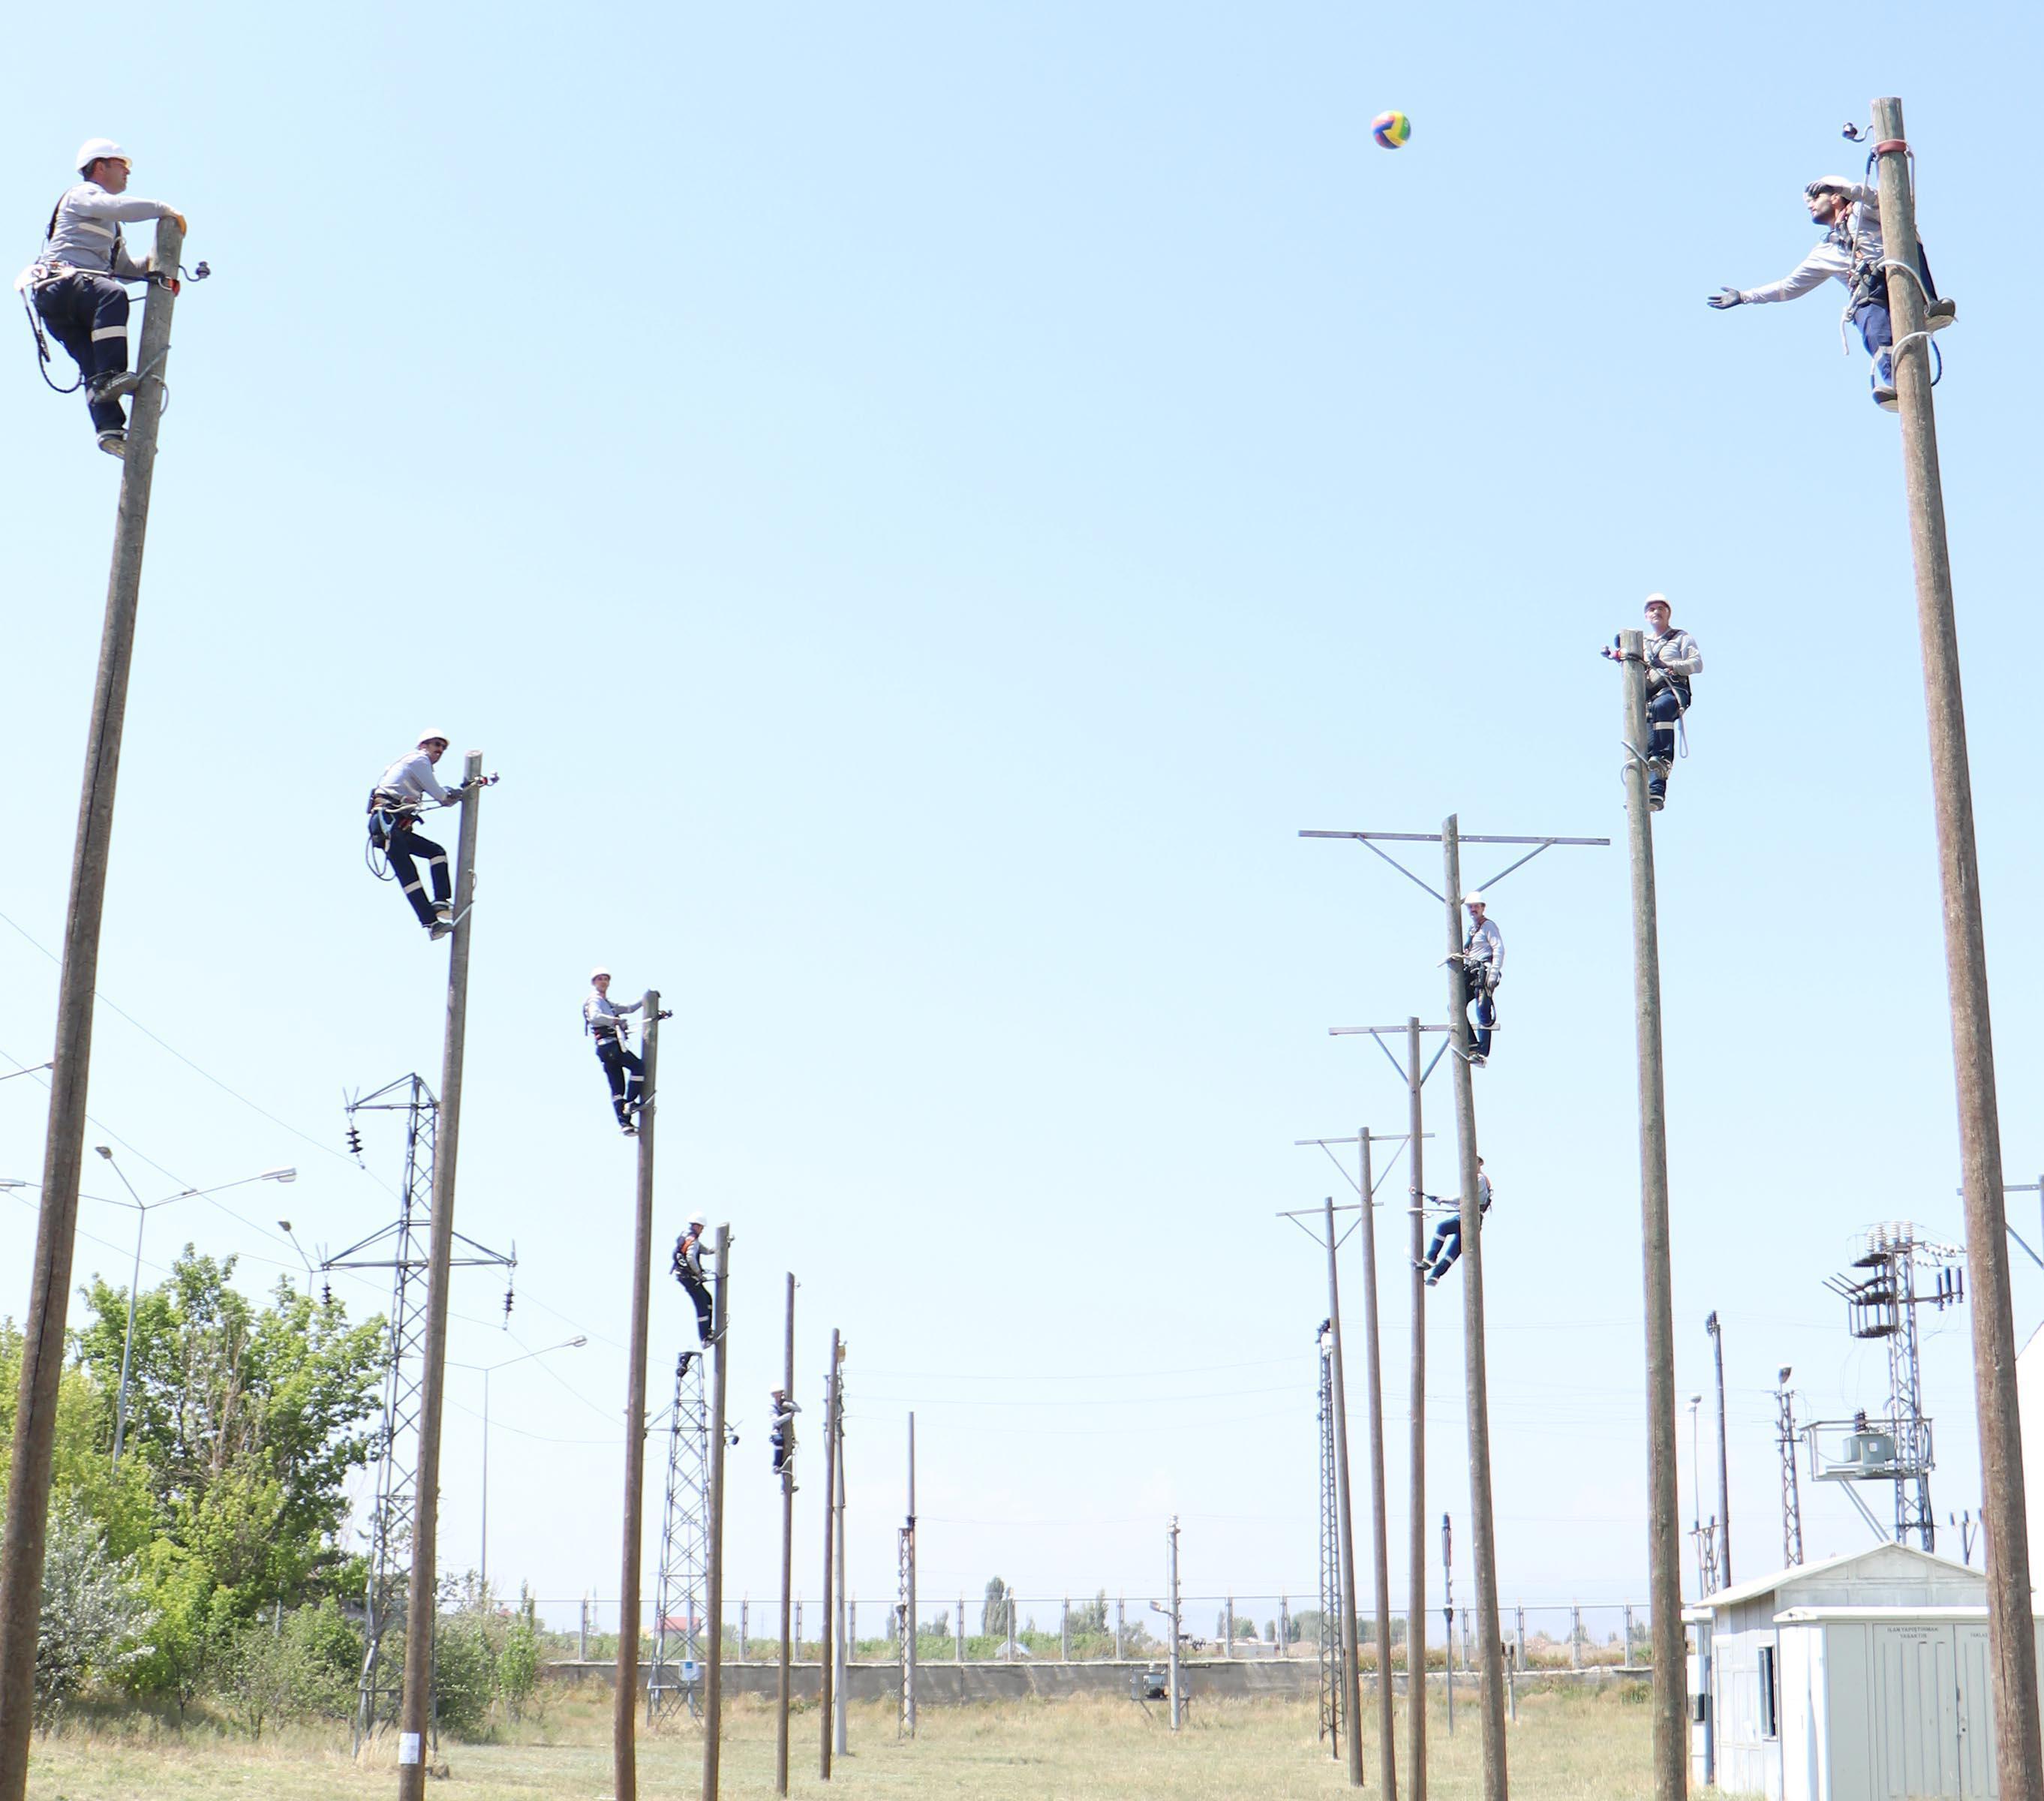 Electricians playing volleyball on top of poles for balance training